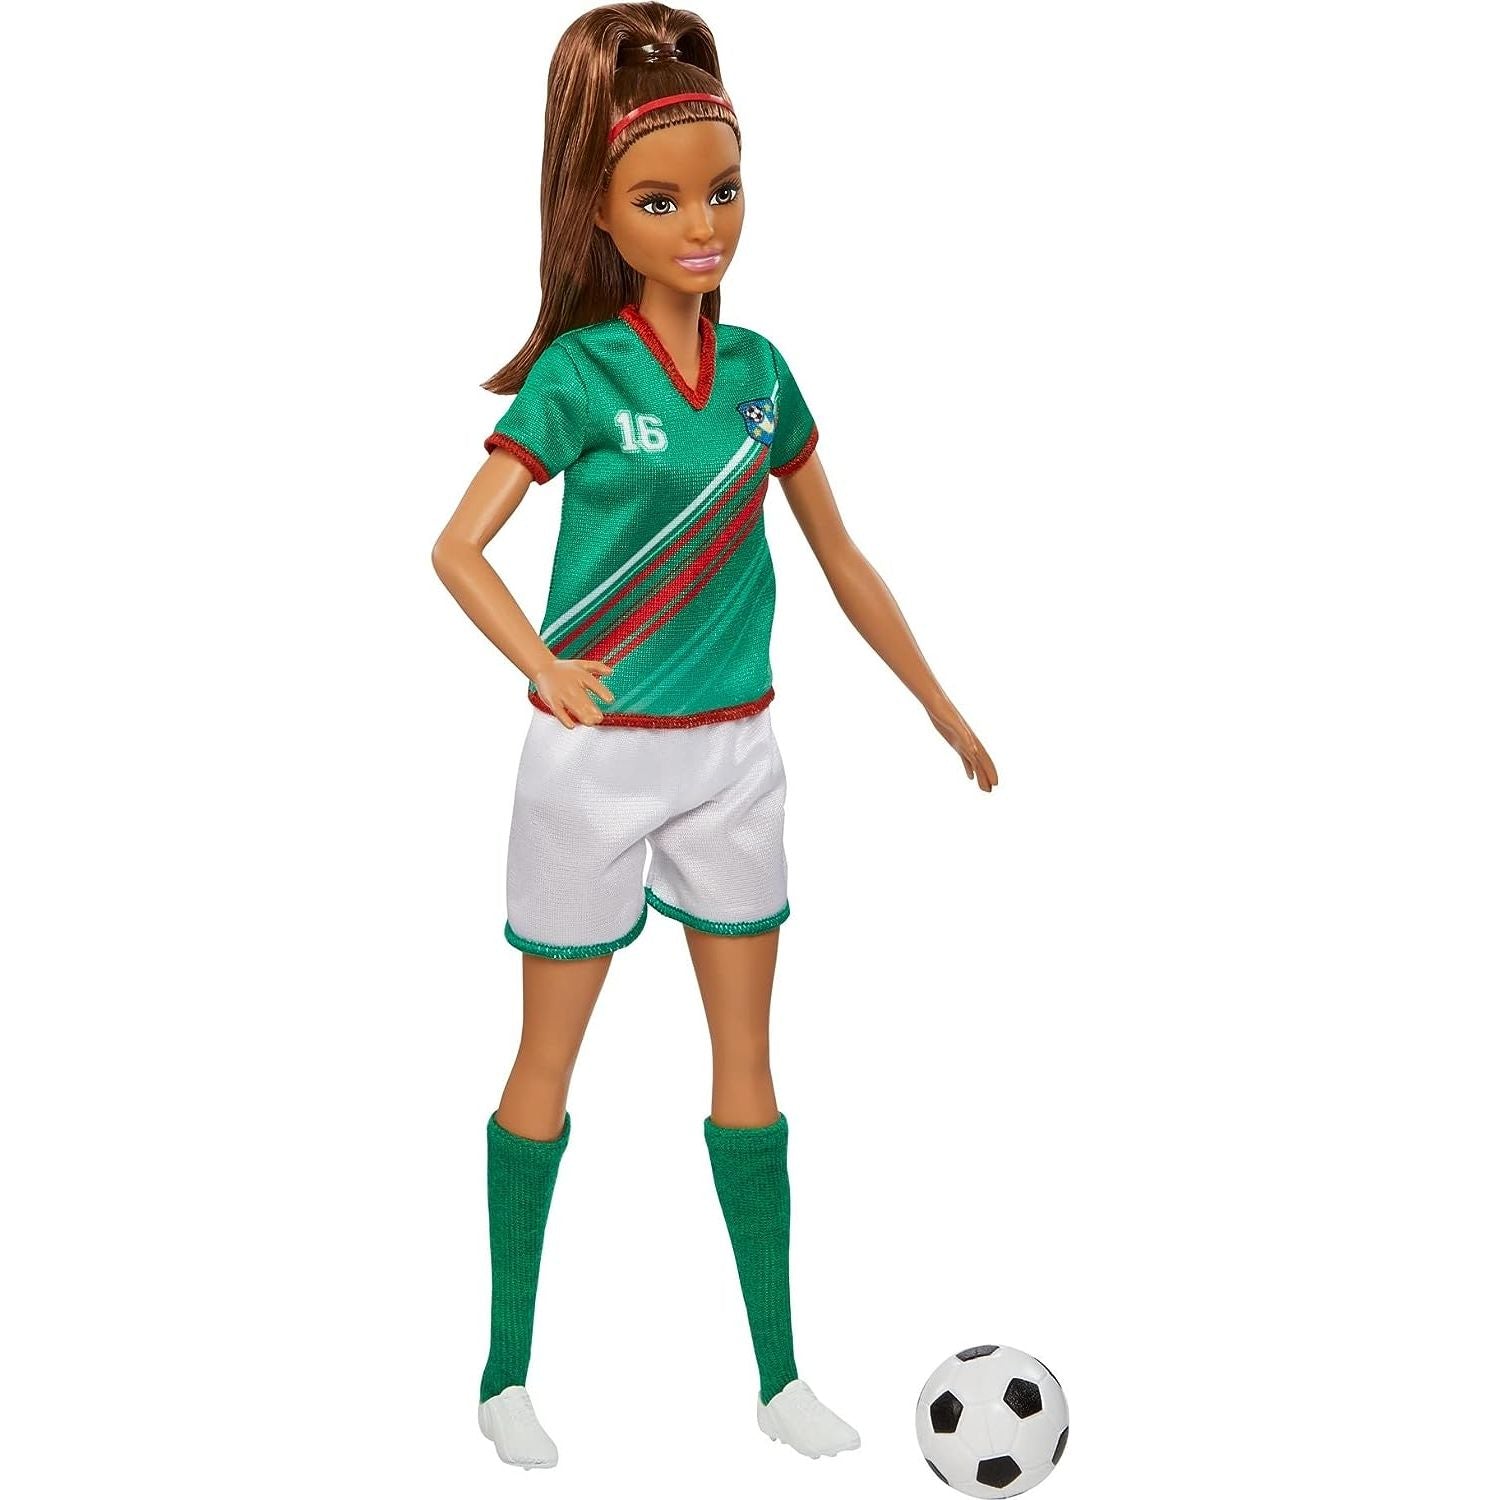 Mattel Barbie Soccer Fashion Doll with Brunette Ponytail, Colorful #16 Uniform, Cleats & Tall Socks, Soccer Ball 11.5 inches